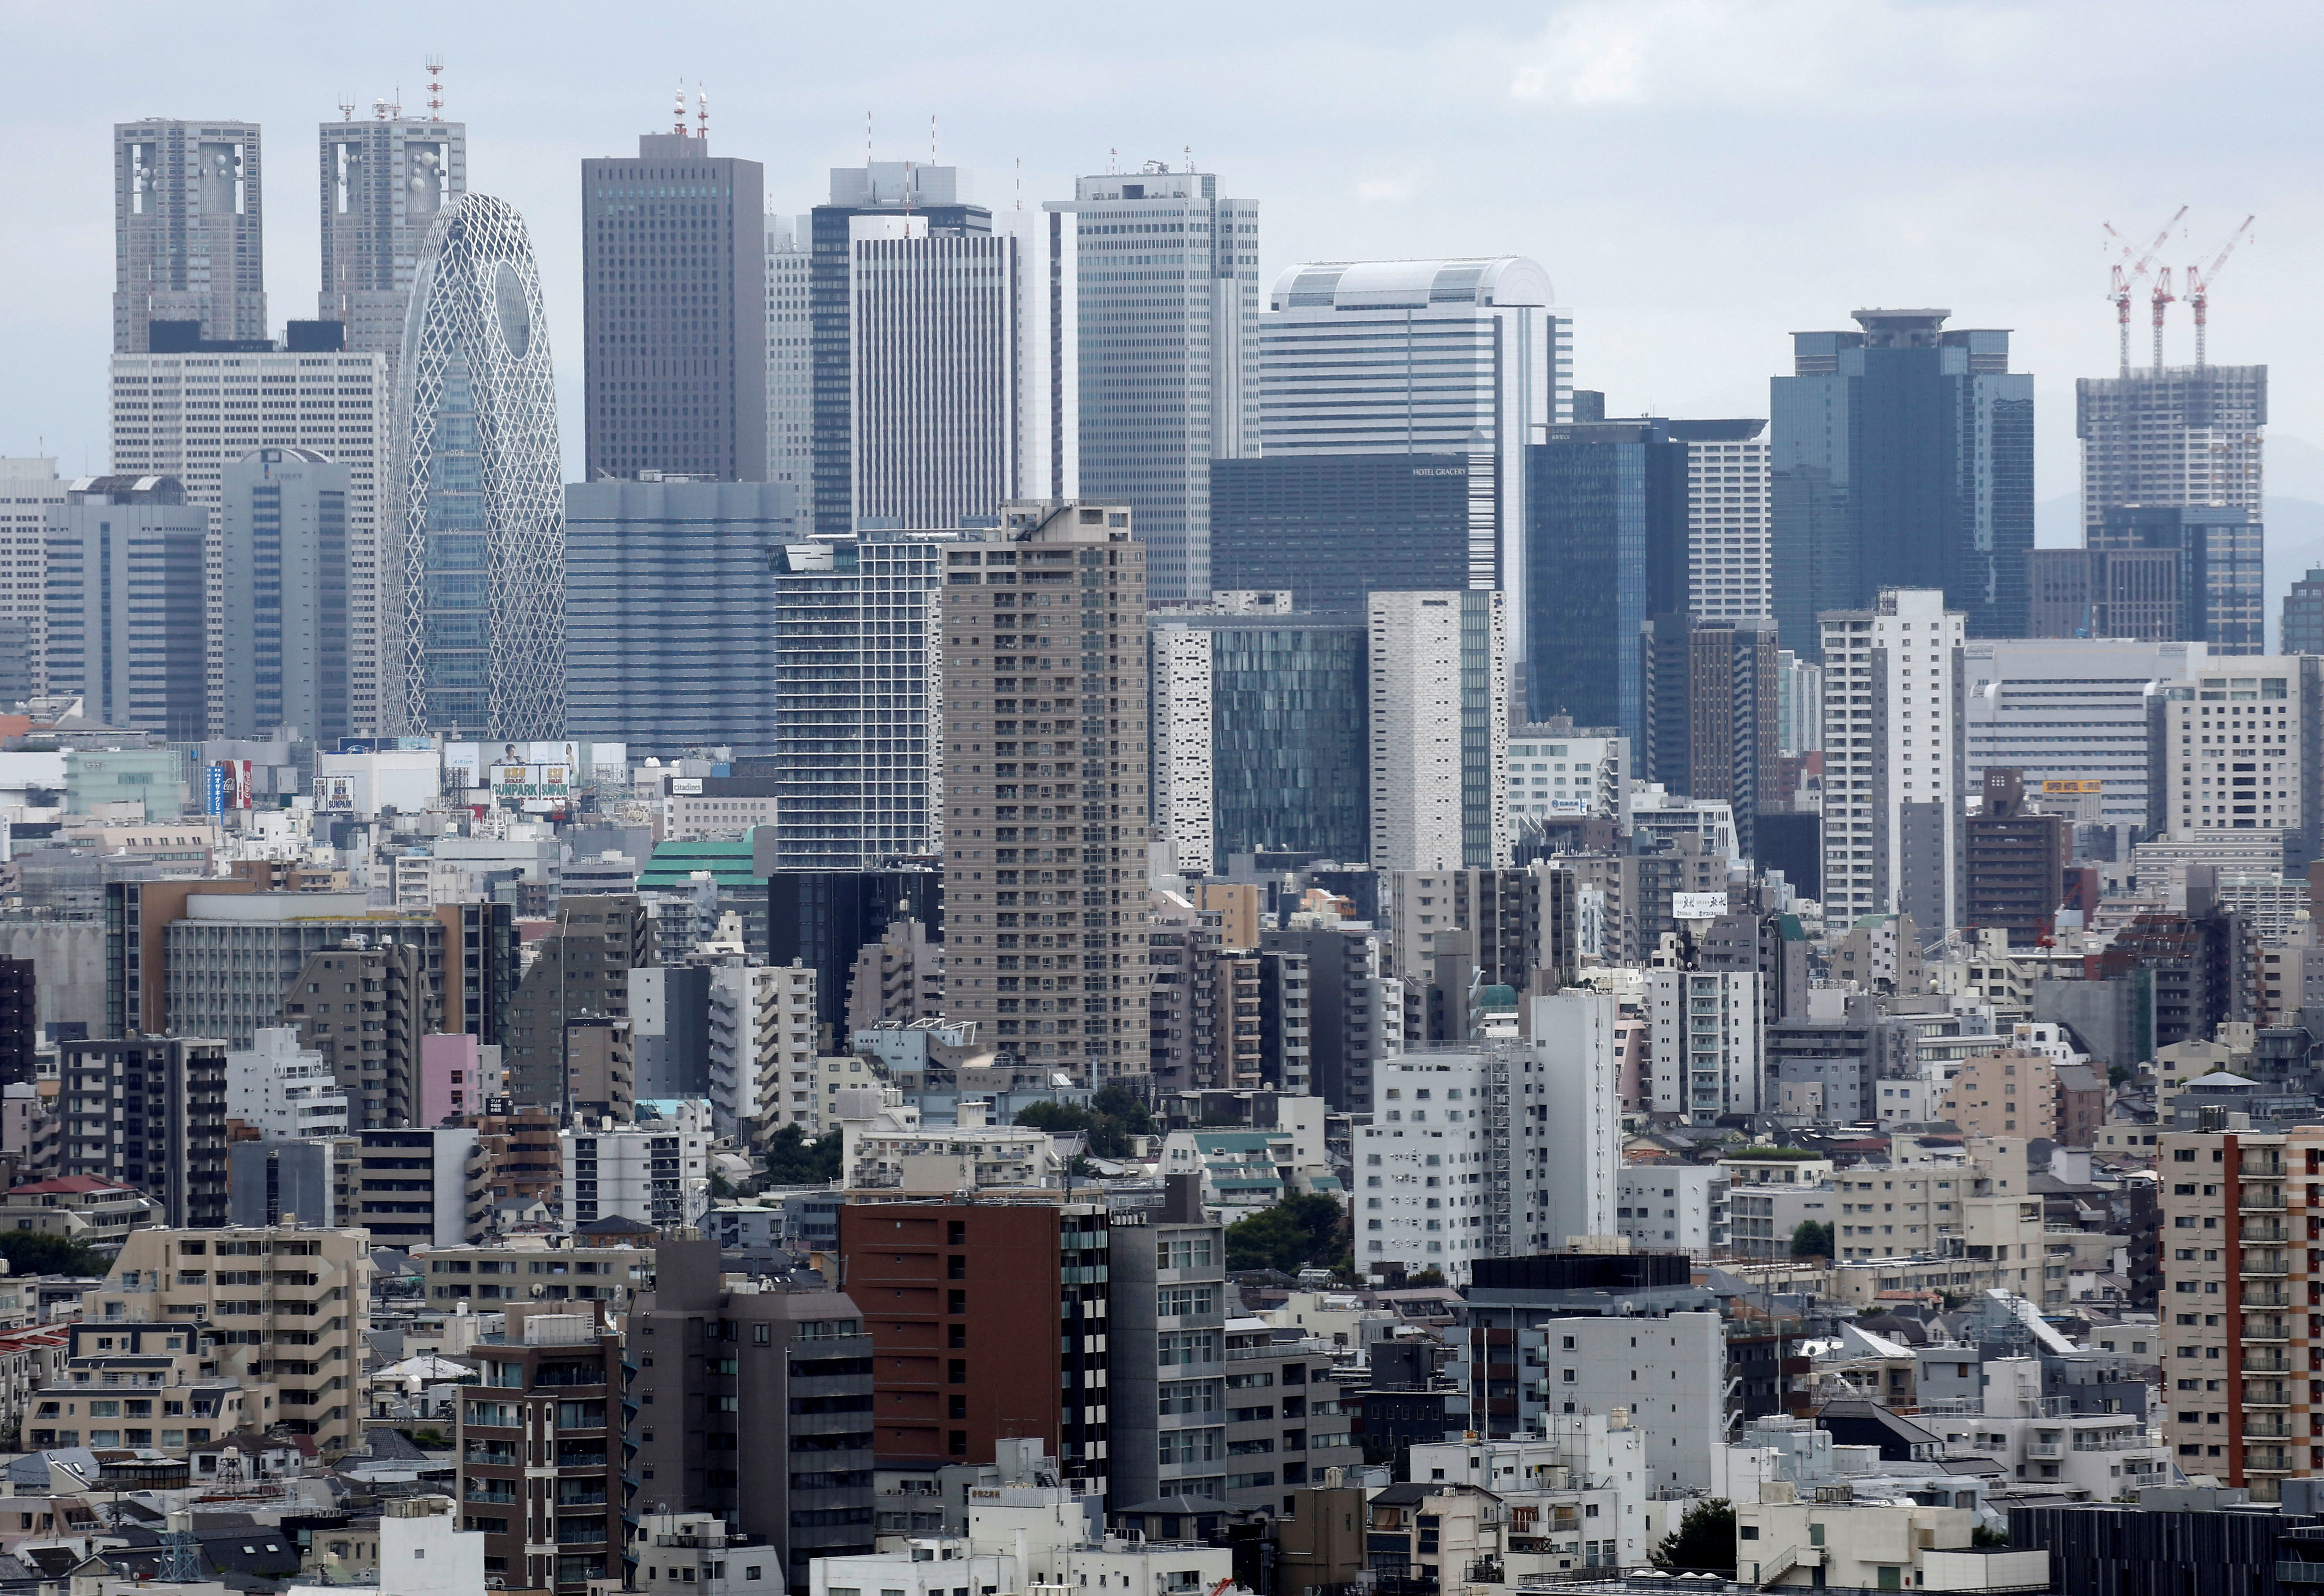 Residential and commercial buildings are pictured in Tokyo